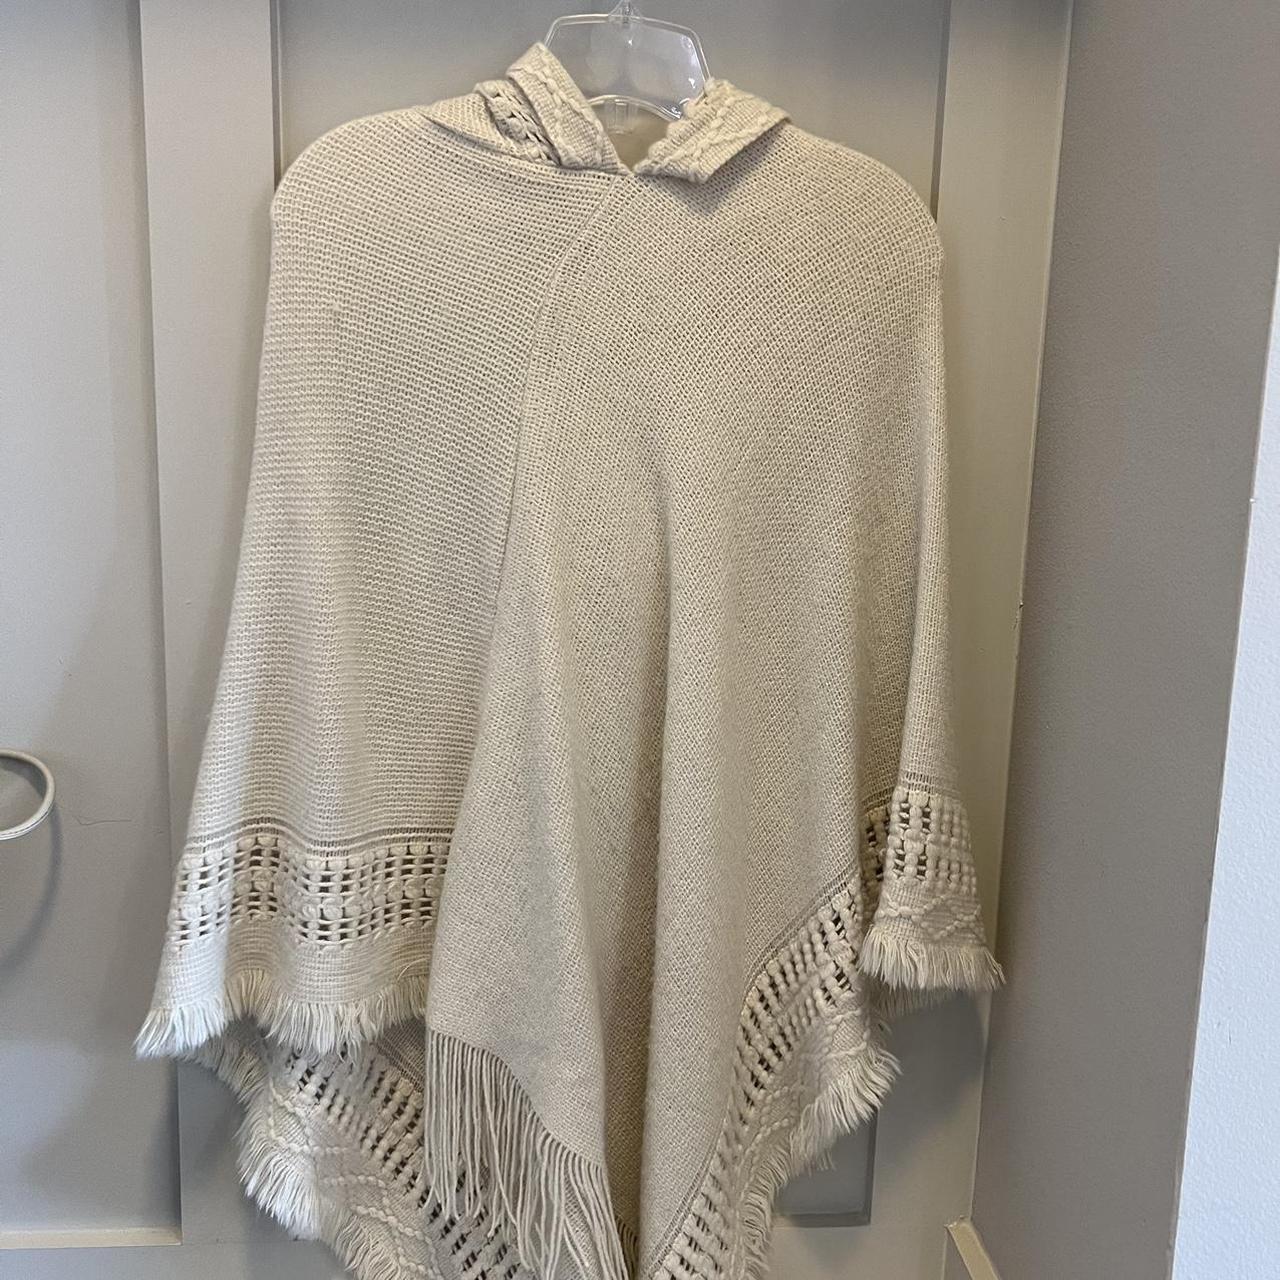 You can't be sad in a poncho, brown beige cream tan - Depop